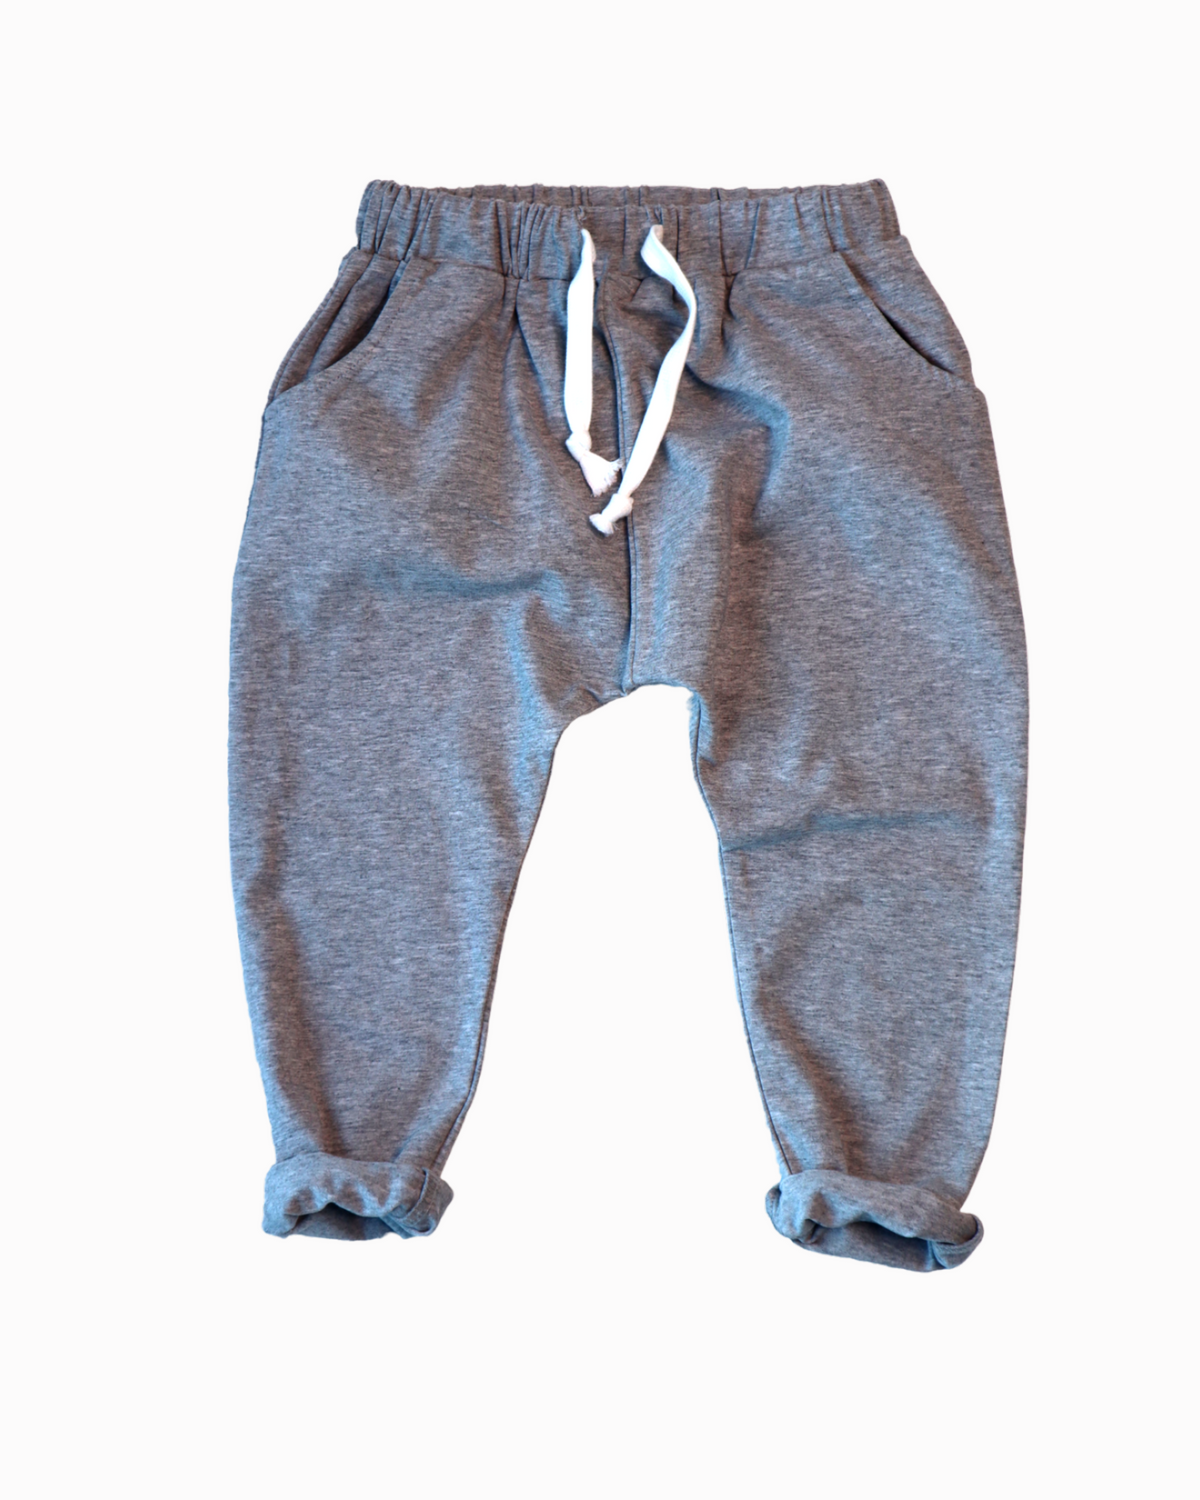 Slouch Jersey Pant in Marl Grey